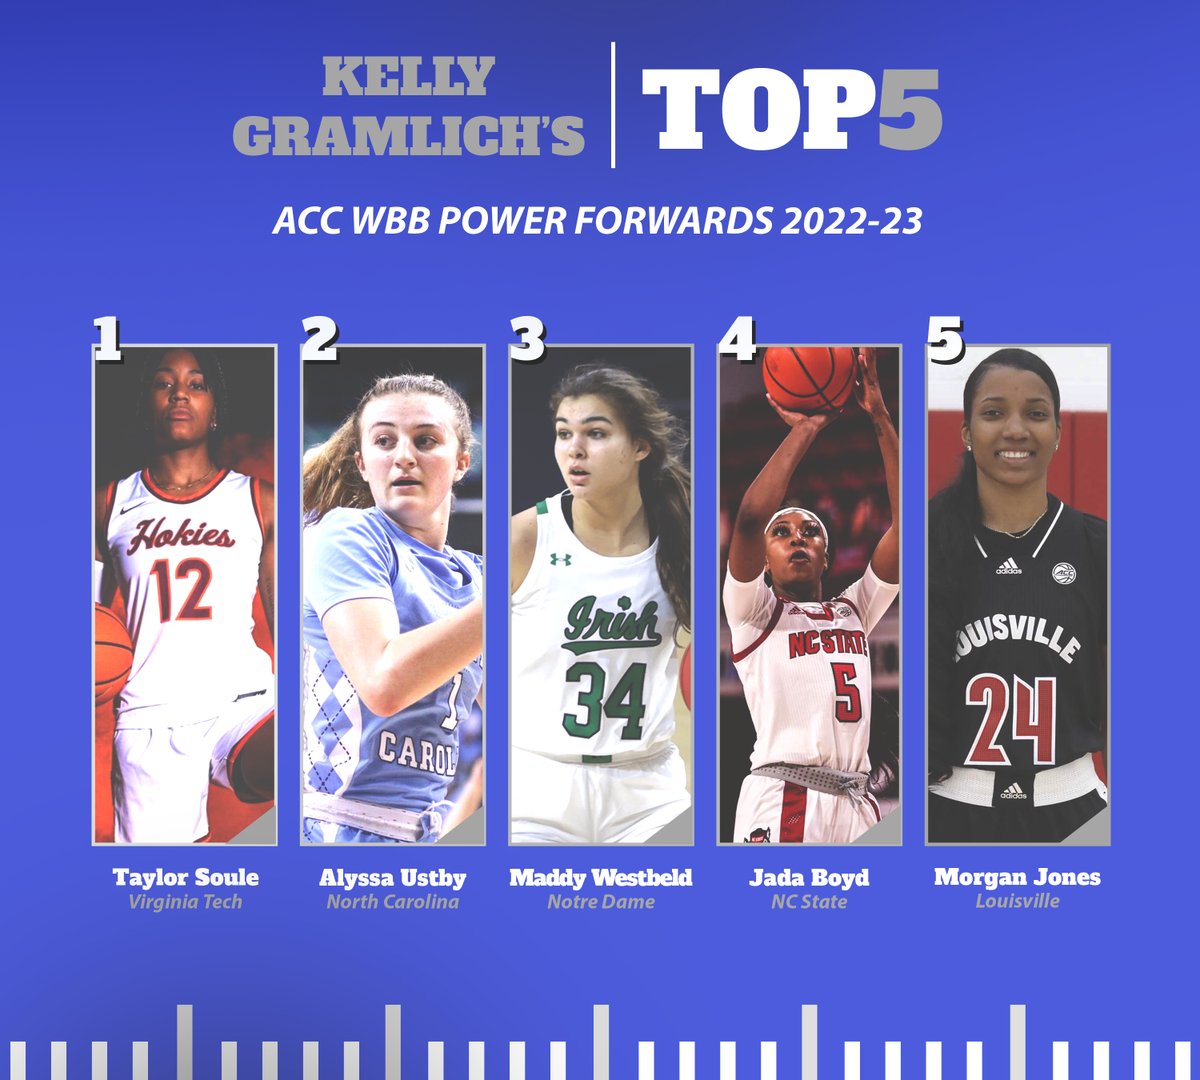 The '4' position has become one of the most impactful positions in hoops. Here are my Top-5 power forwards heading into the 2022-23 @accwbb season. This group is FULL of talent 🔥